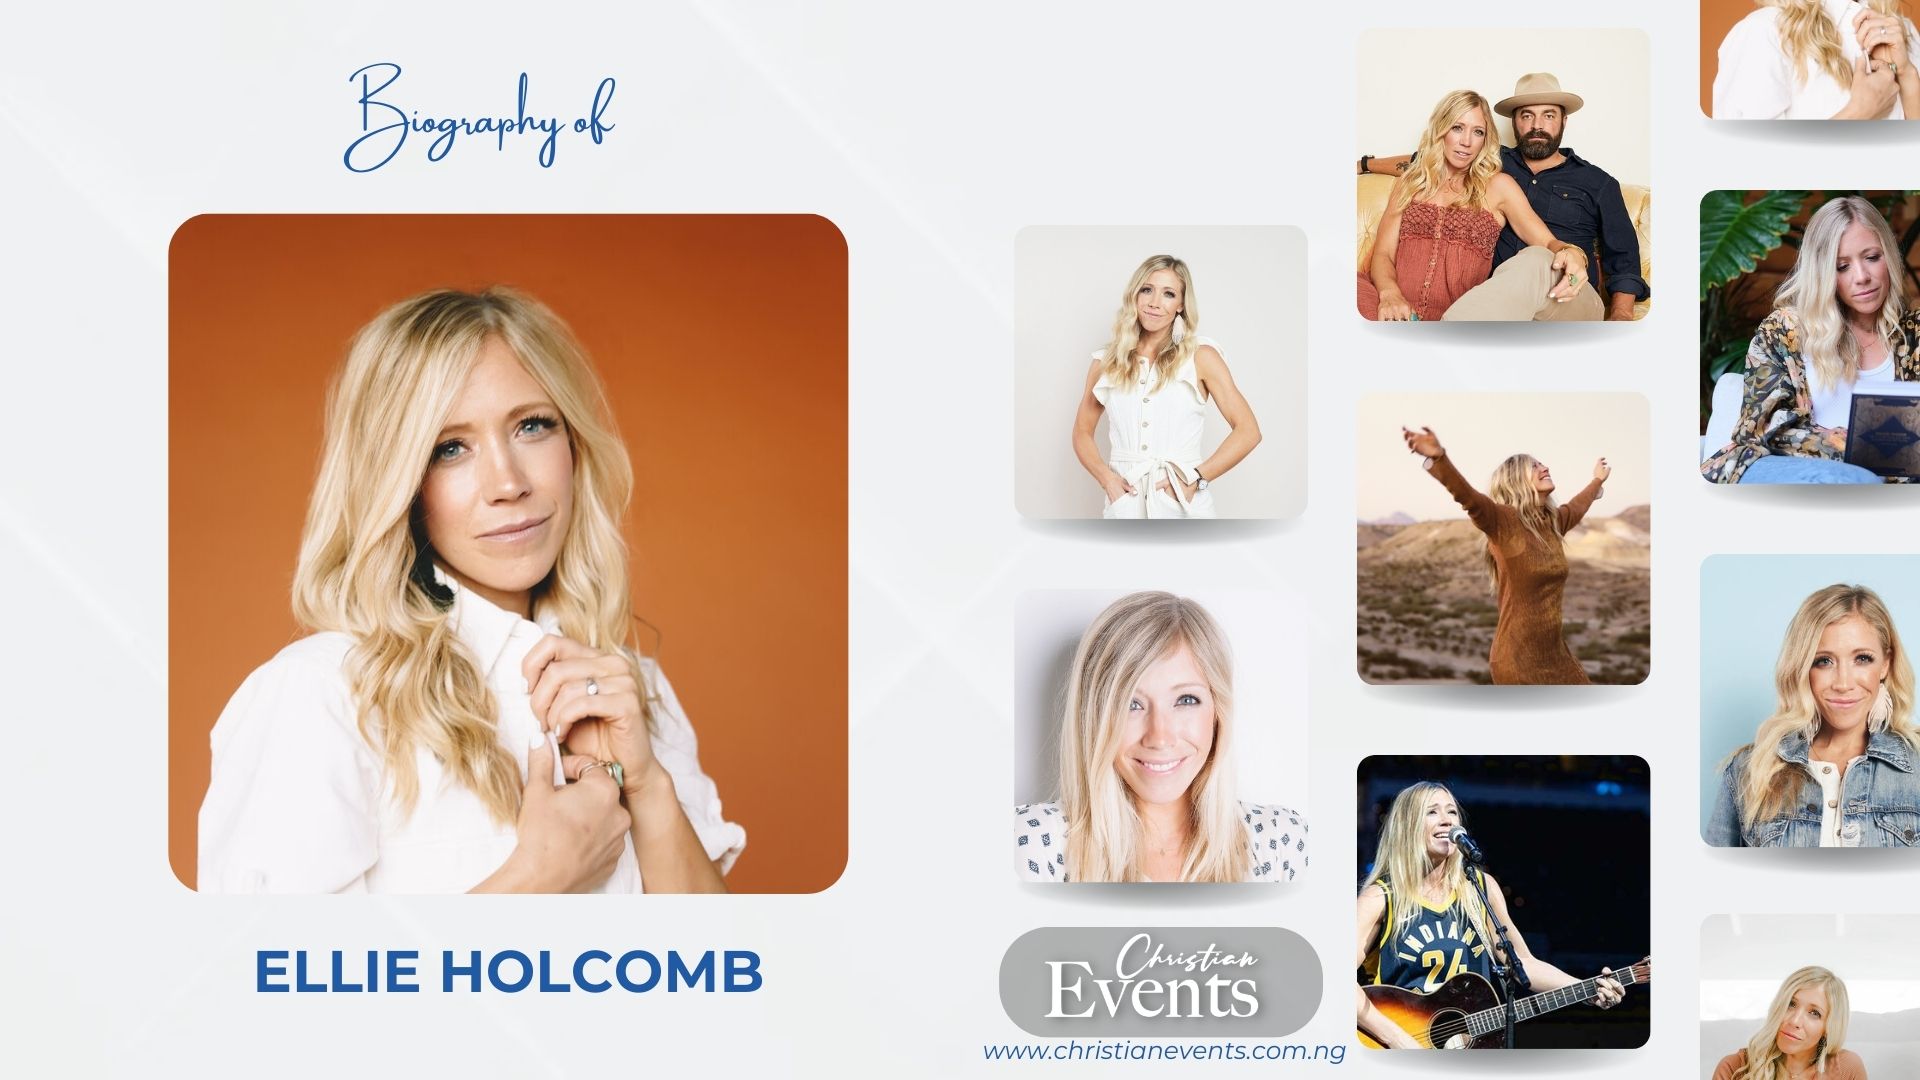 Biography of Ellie Holcomb